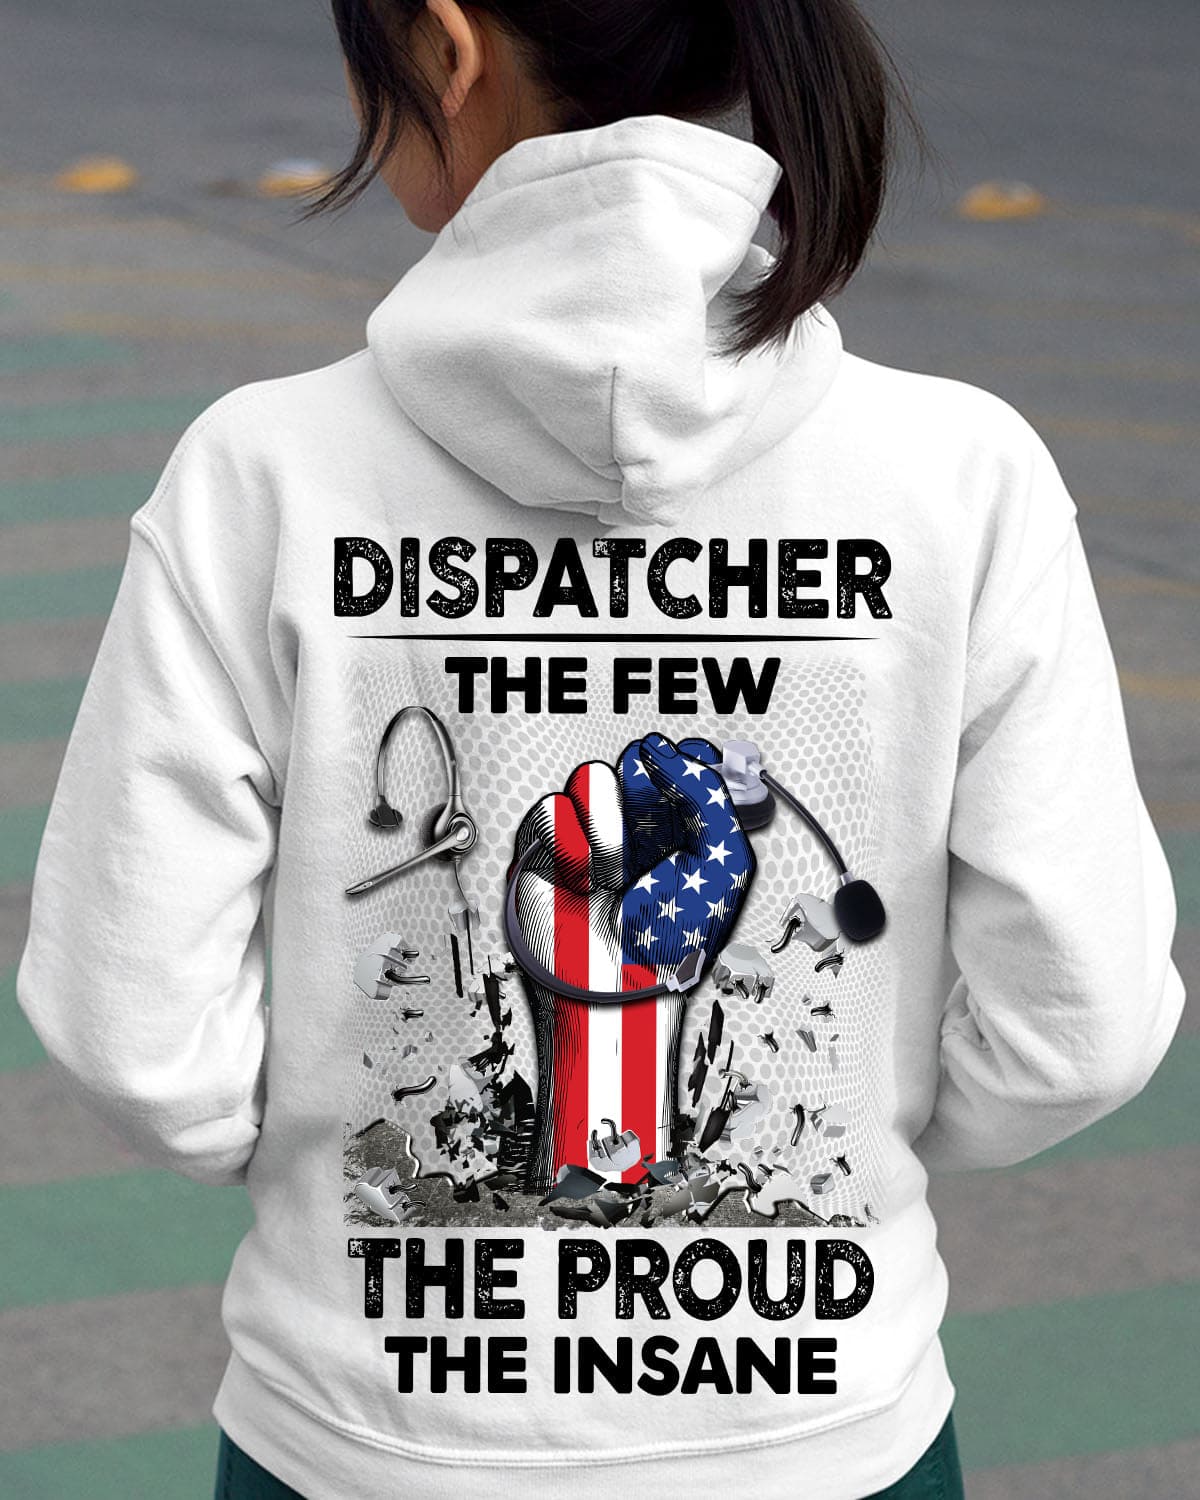 vDispatcher the few, the proud, the insane - American dispatcher T-shirt This T-Shirt, Hoodie, Sweatshirt, Ladies T-Shirt, Youth T-shirt is for lovers like Dispatcher the few, the proud, the insane, American dispatcher T-shirt Shirt are much suitable for those who Love Hobbies, Holidays, Pets, Movies, Out Door, Sport.